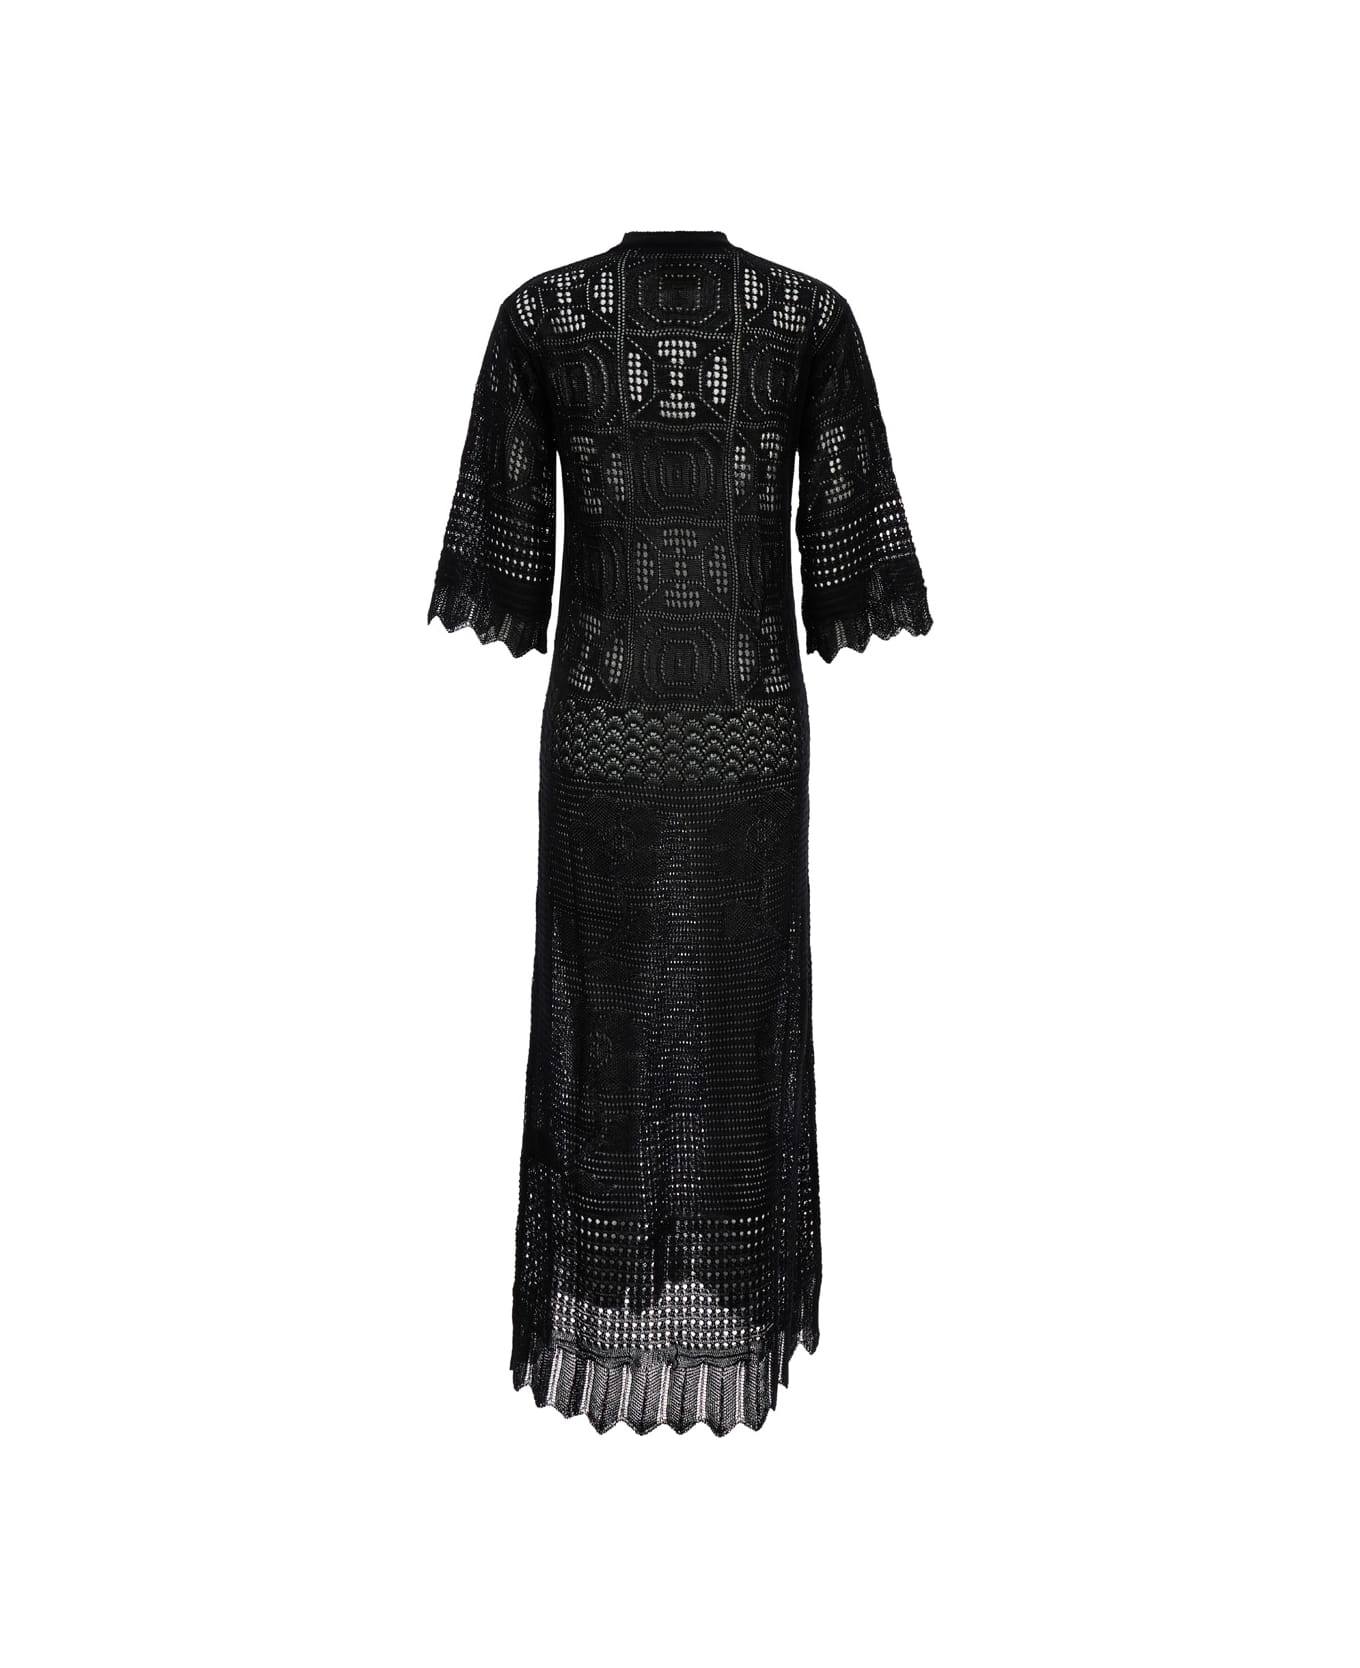 SEMICOUTURE Long Black Dress With Lace-up Closure In Cotton Lace Woman - Black ワンピース＆ドレス